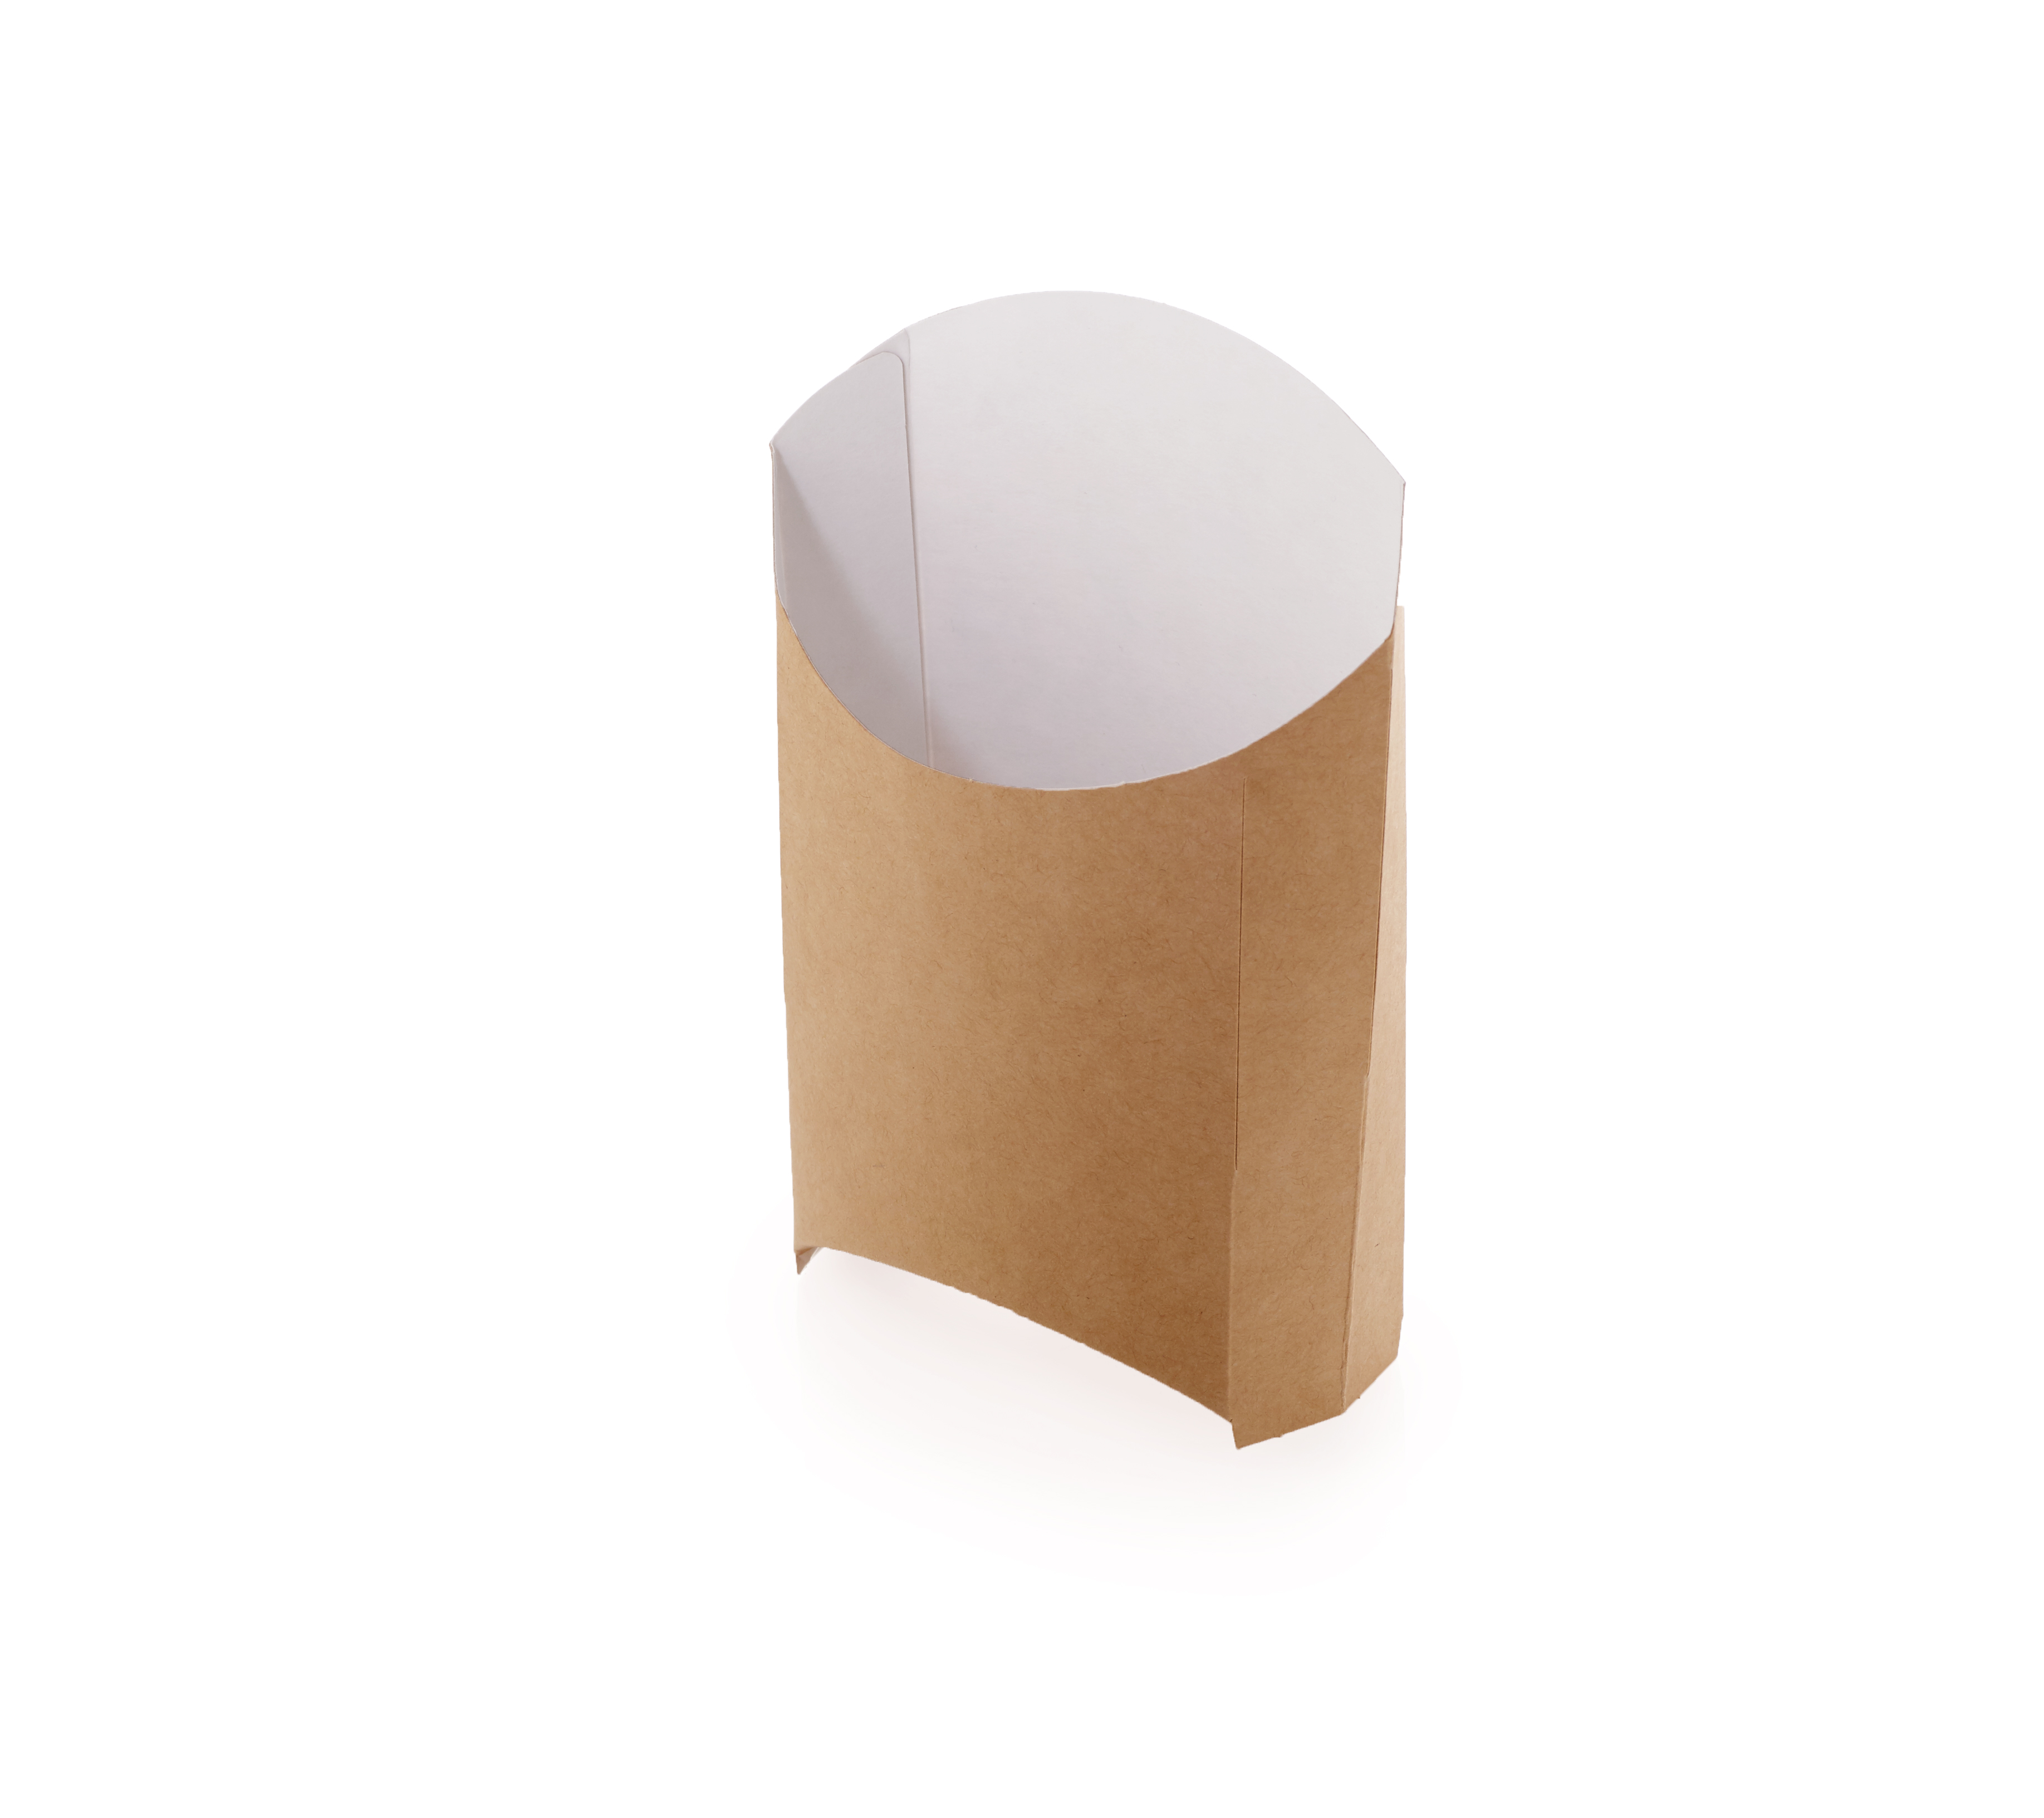 OSQ BAG FRY paper bags for French fries